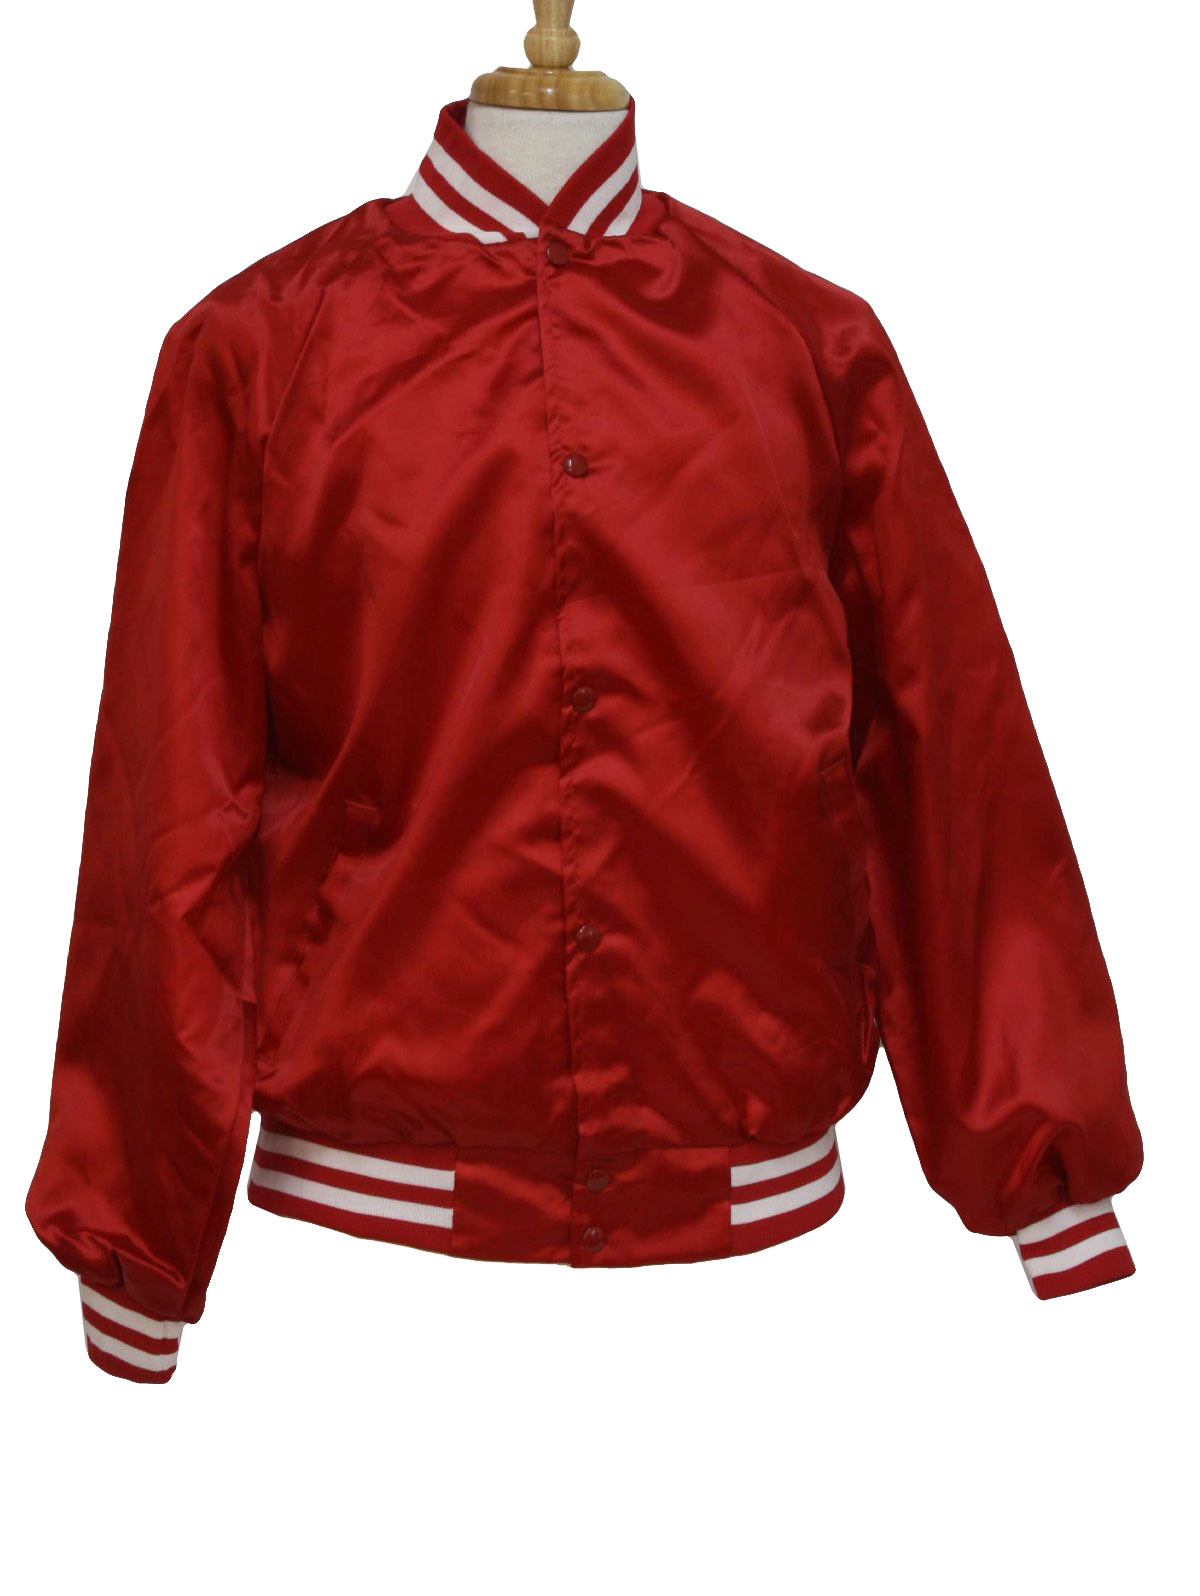 Vintage 80s Jacket: 80s -Westark- Mens red and white nylon satin with ...